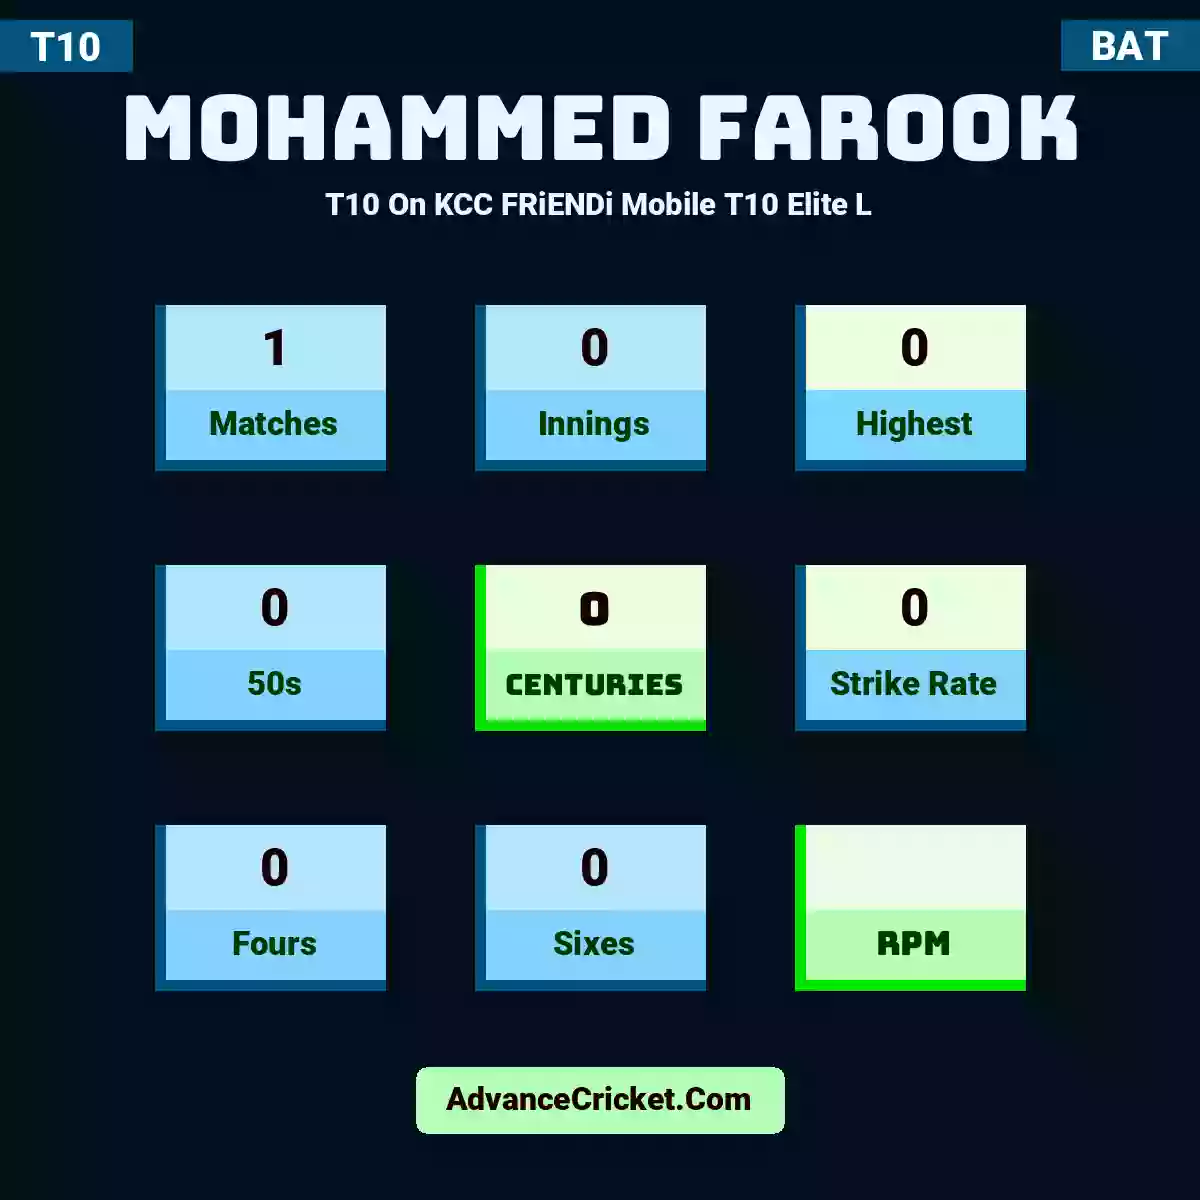 Mohammed Farook T10  On KCC FRiENDi Mobile T10 Elite L, Mohammed Farook played 1 matches, scored 0 runs as highest, 0 half-centuries, and 0 centuries, with a strike rate of 0. M.Farook hit 0 fours and 0 sixes.